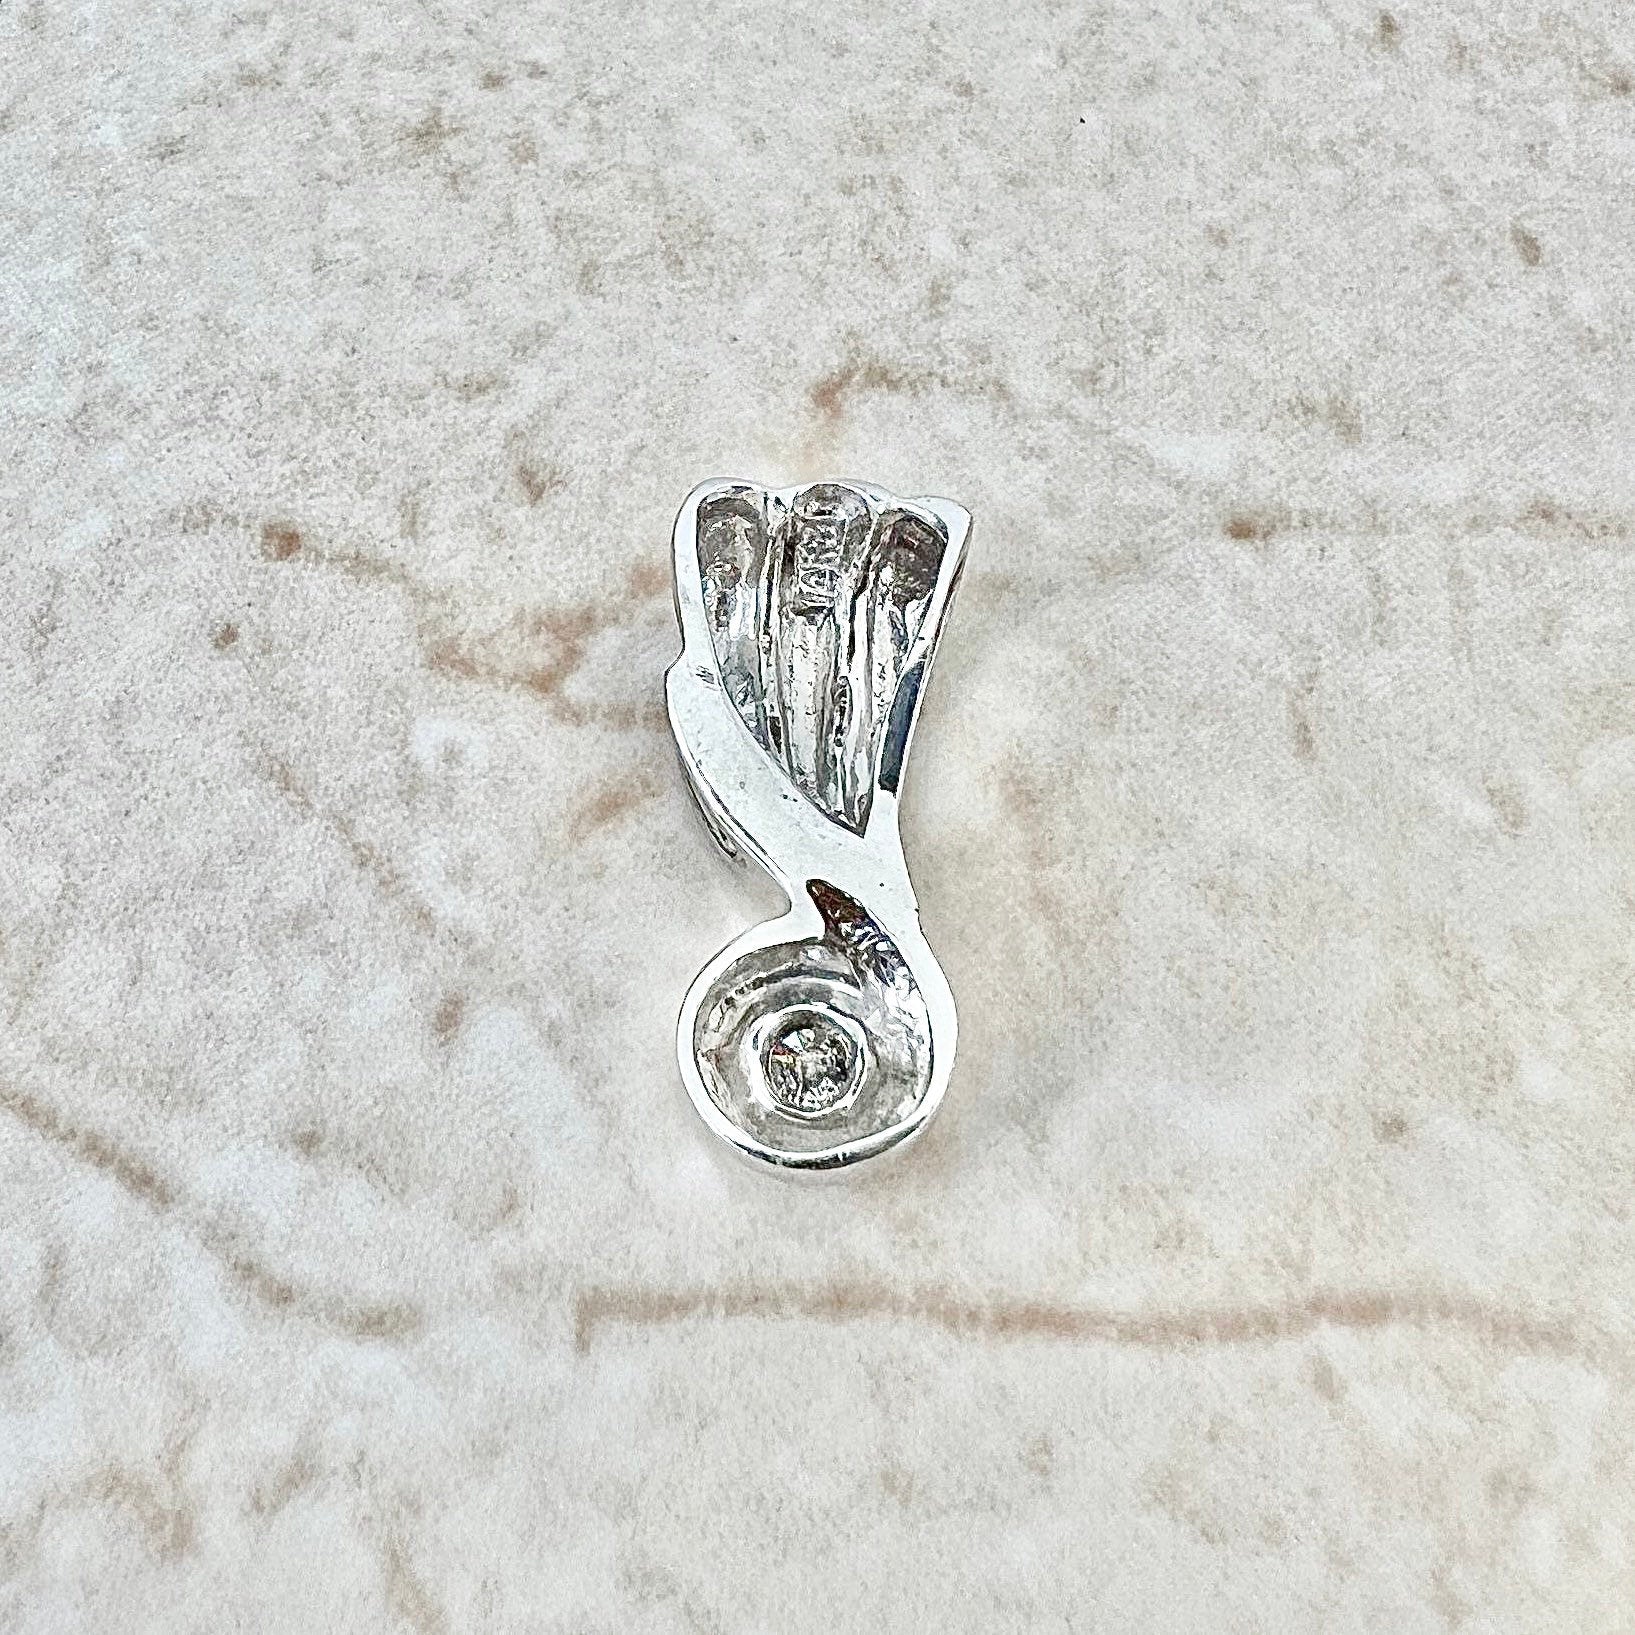 Vintage 14K Diamond Solitaire Pendant Necklace - White Gold Diamond Slide Pendant - Diamond Necklace - Birthday Gift - Best Gift For Her